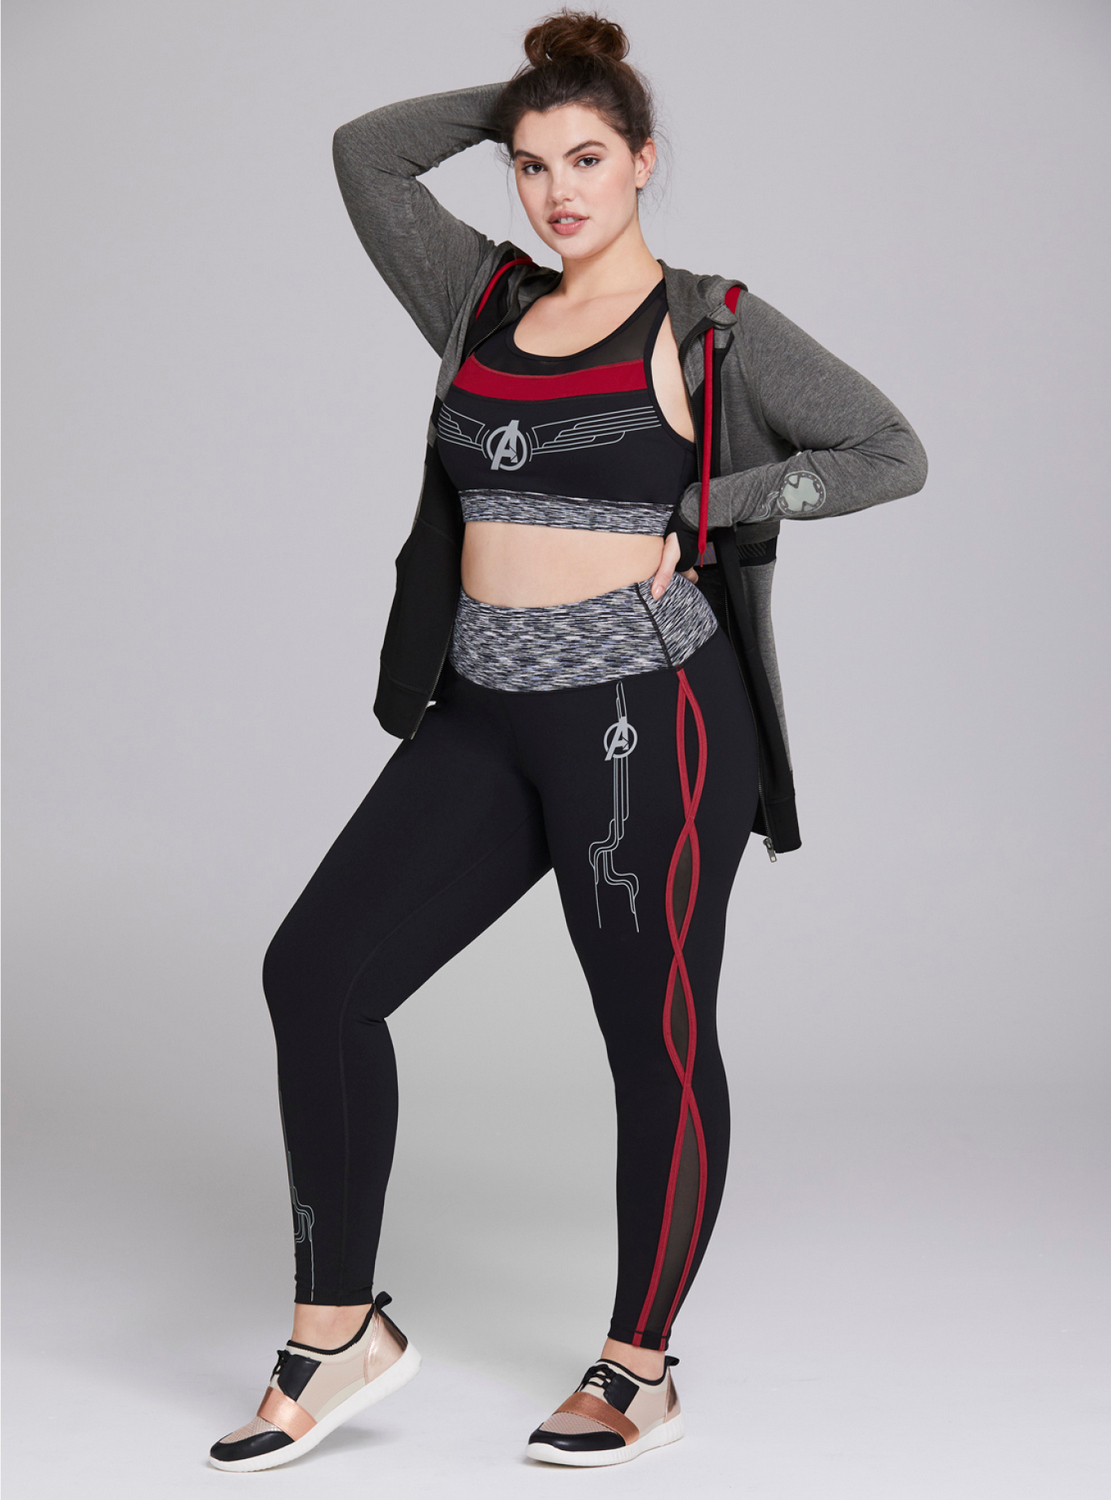 Torrid Avengers Endgame Plus Size Collection with Her Universe